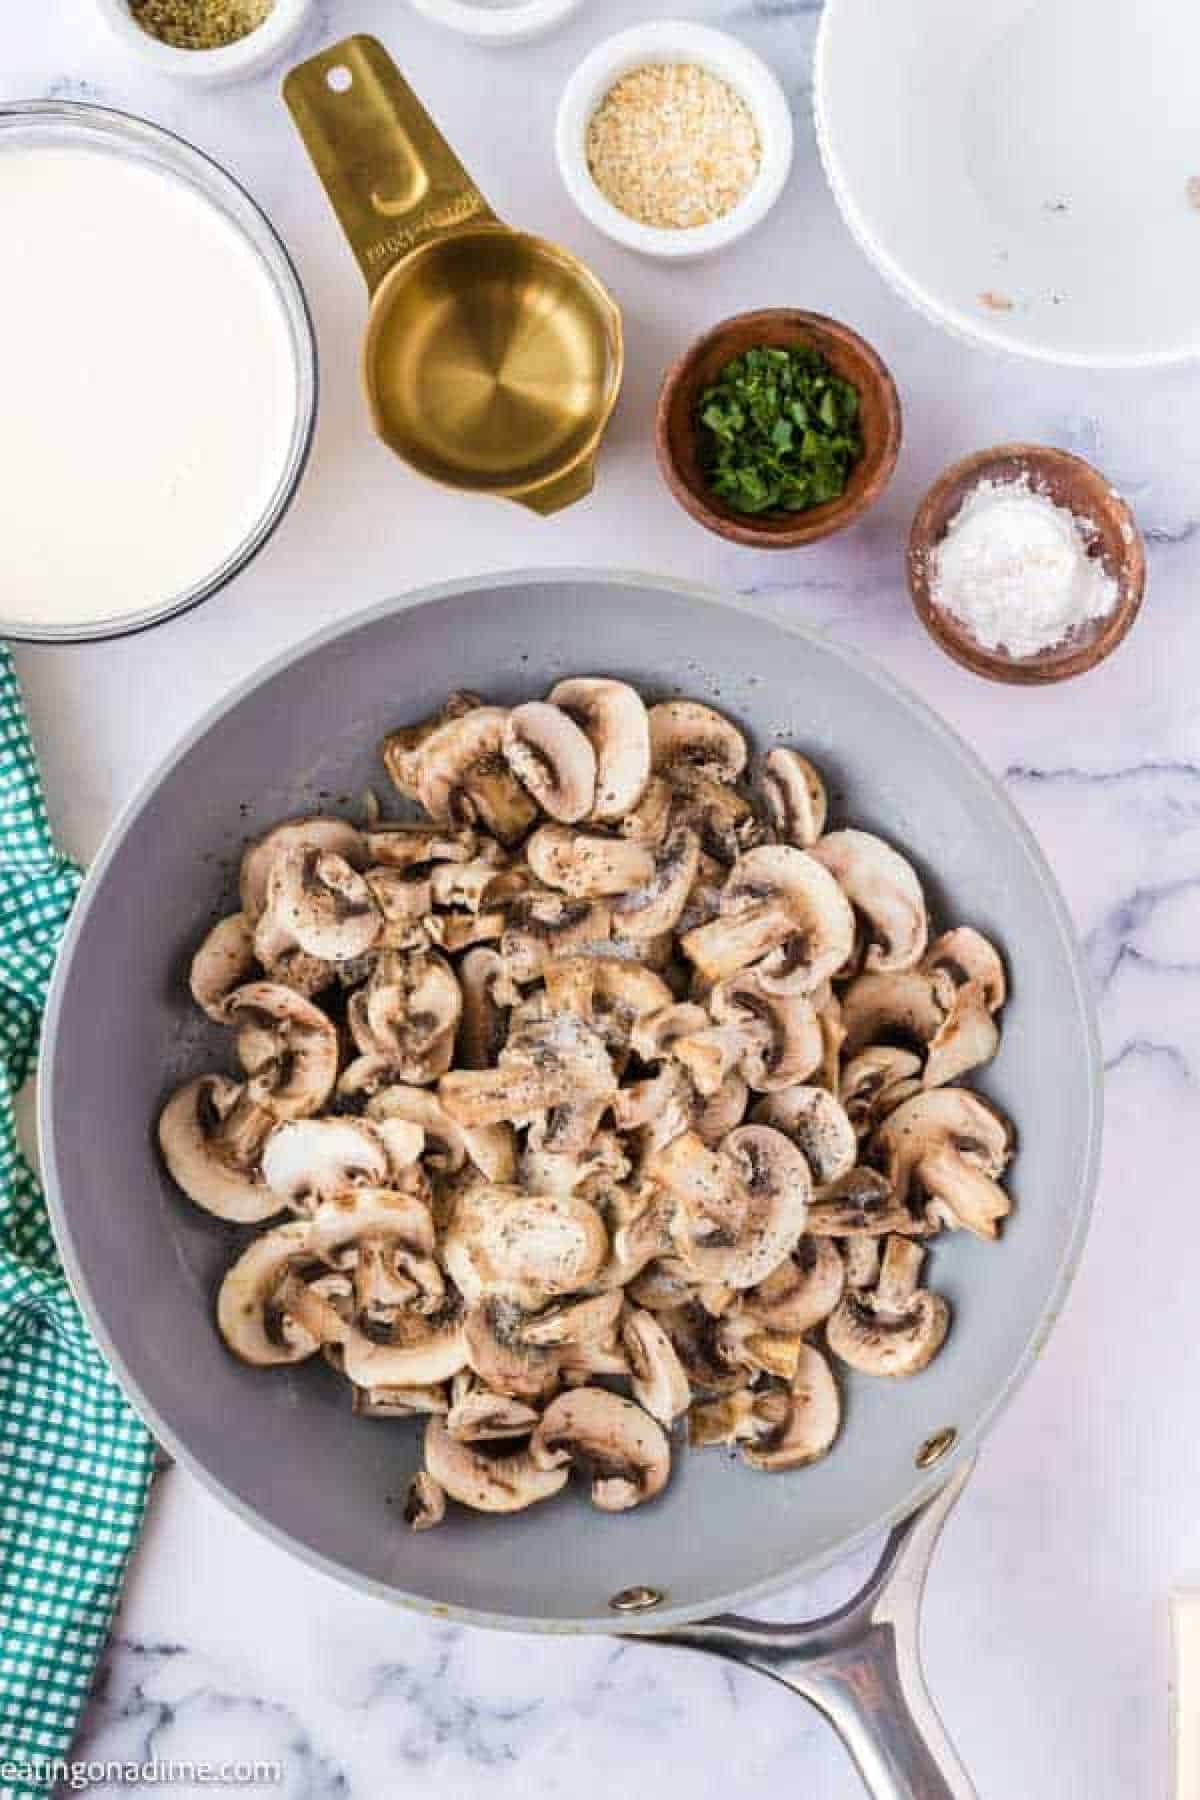 Slice mushrooms in a skillet topped with seasoning with bowls of heavy whipping cream and small bowls of seasoning